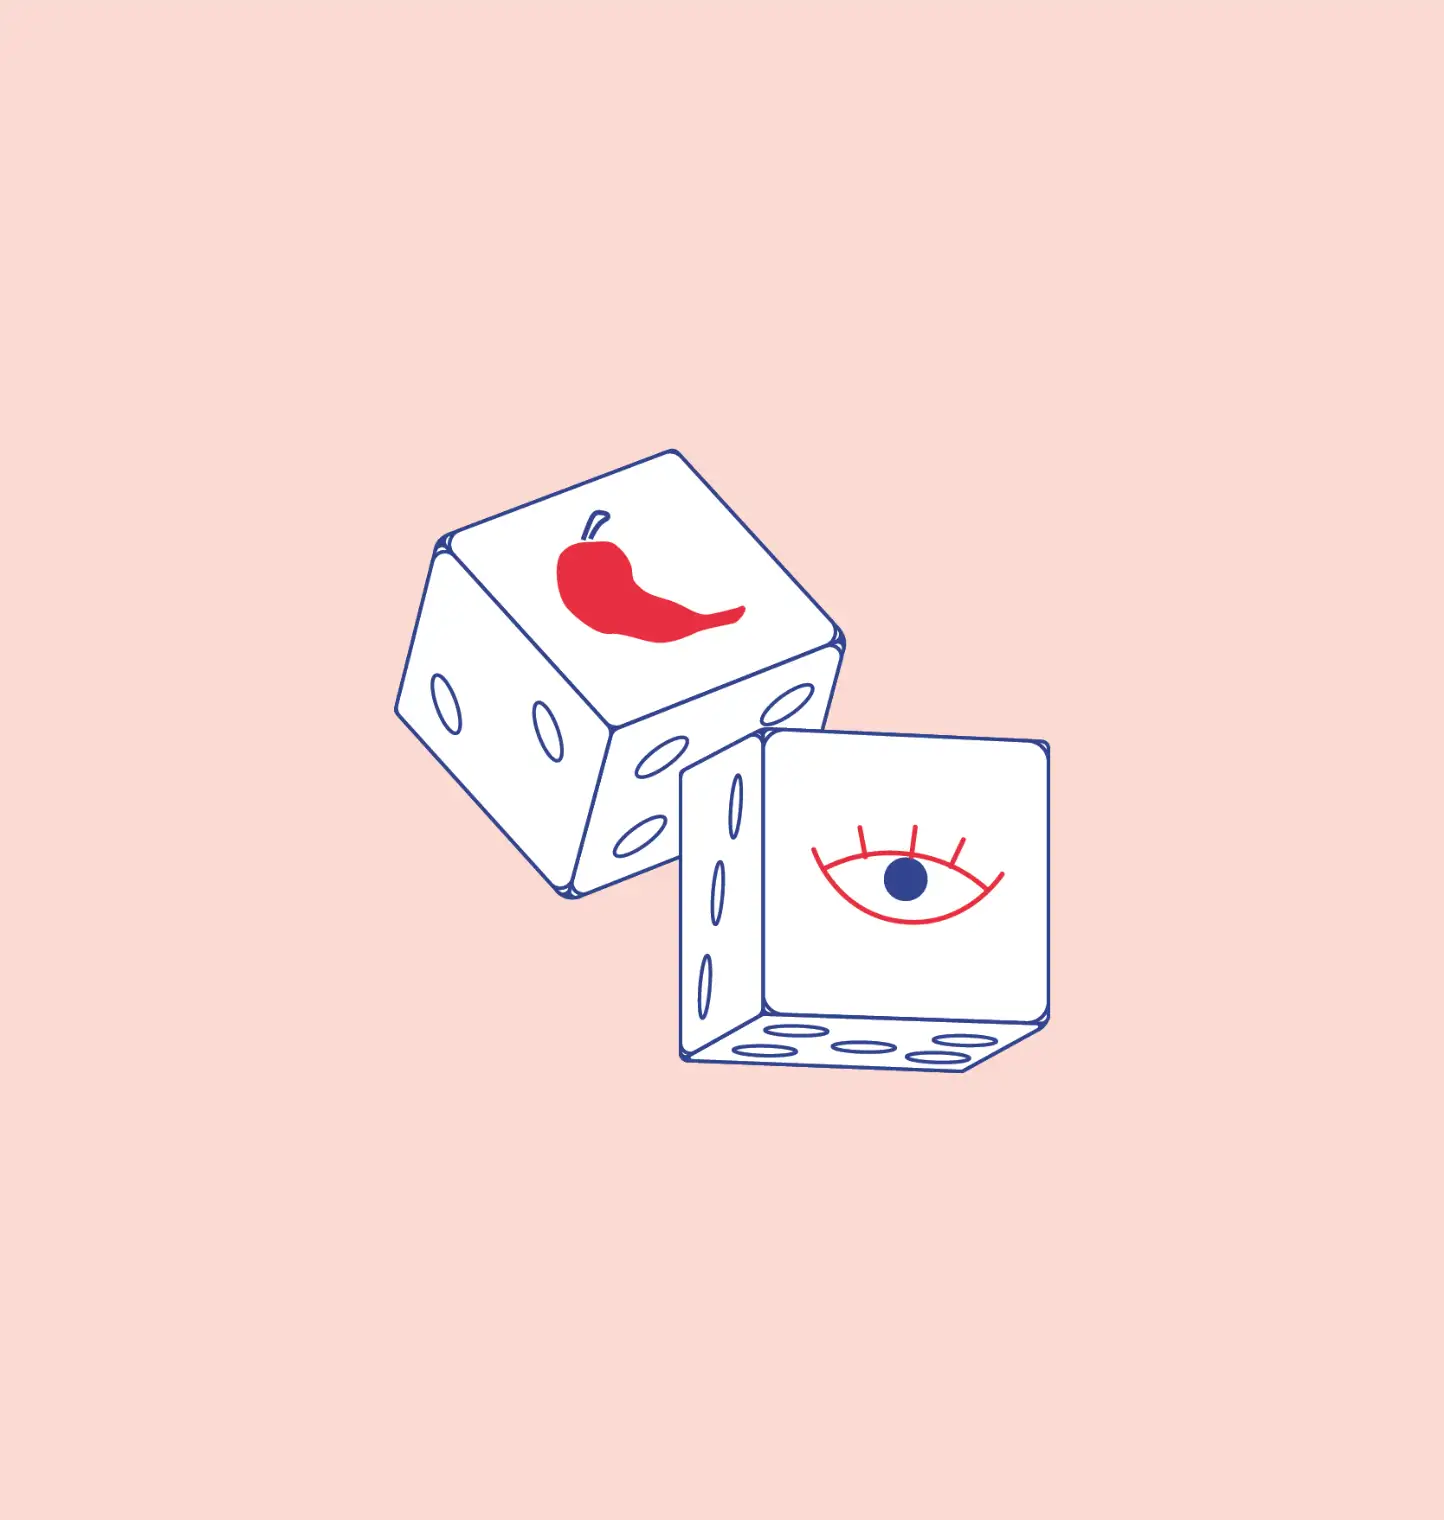 Spicy Eyes dice icon in blue and red.